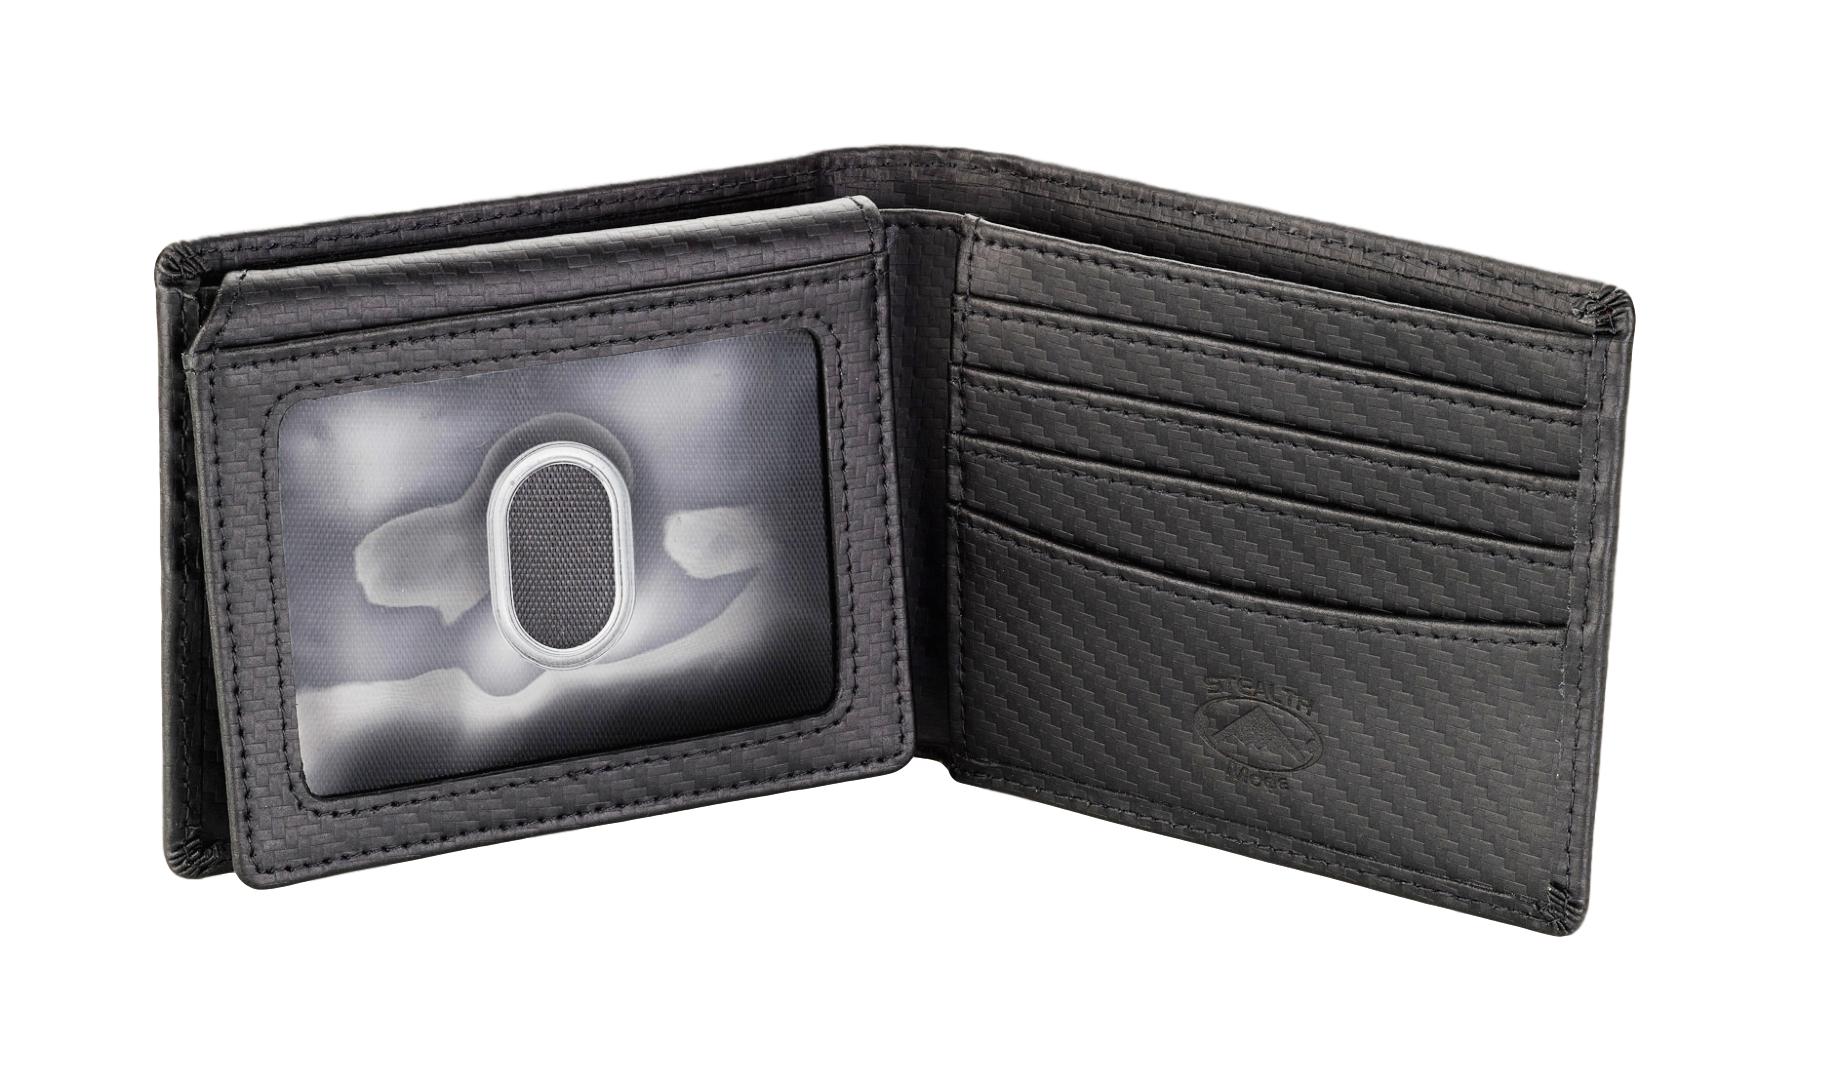 Carbon Fiber Wallet for Men With ID Window and RFID Blocking